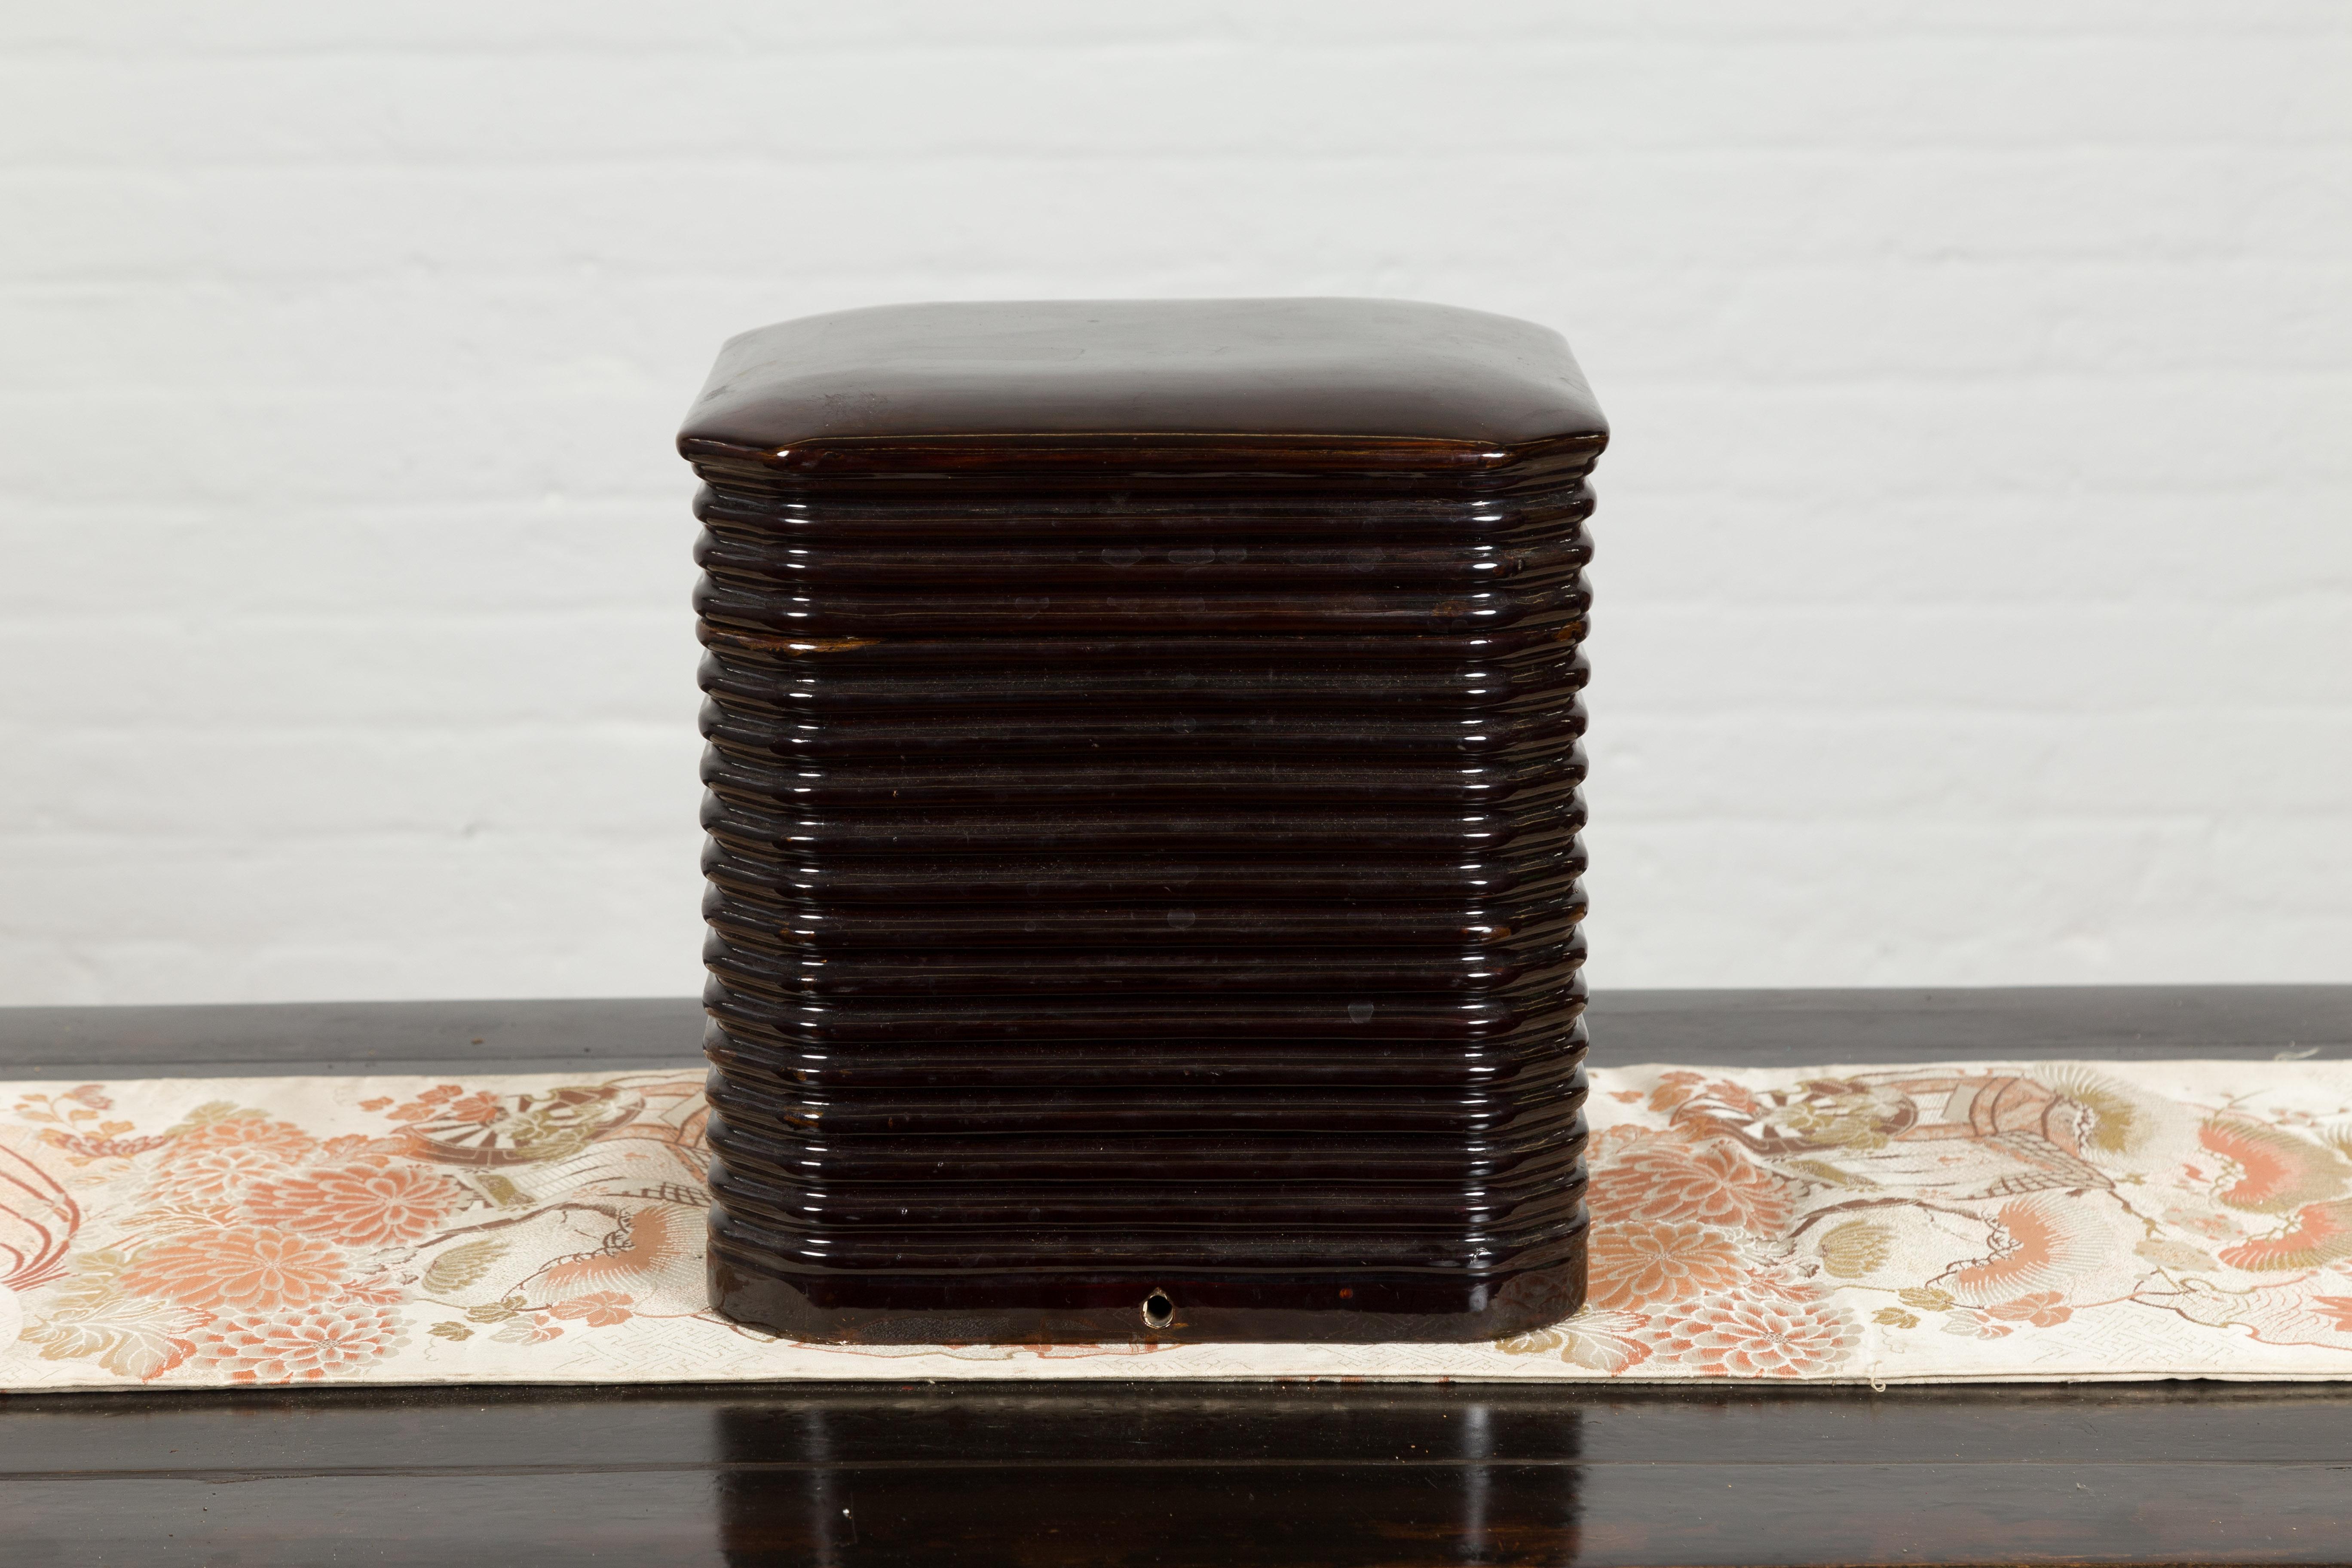 A Japanese Taisho period black lacquer box from the early 20th century with reeded patterns and lid. Created in Japan during the Taisho period, this black lacquered lidded box features a simple square shaped silhouette accented with canted corners